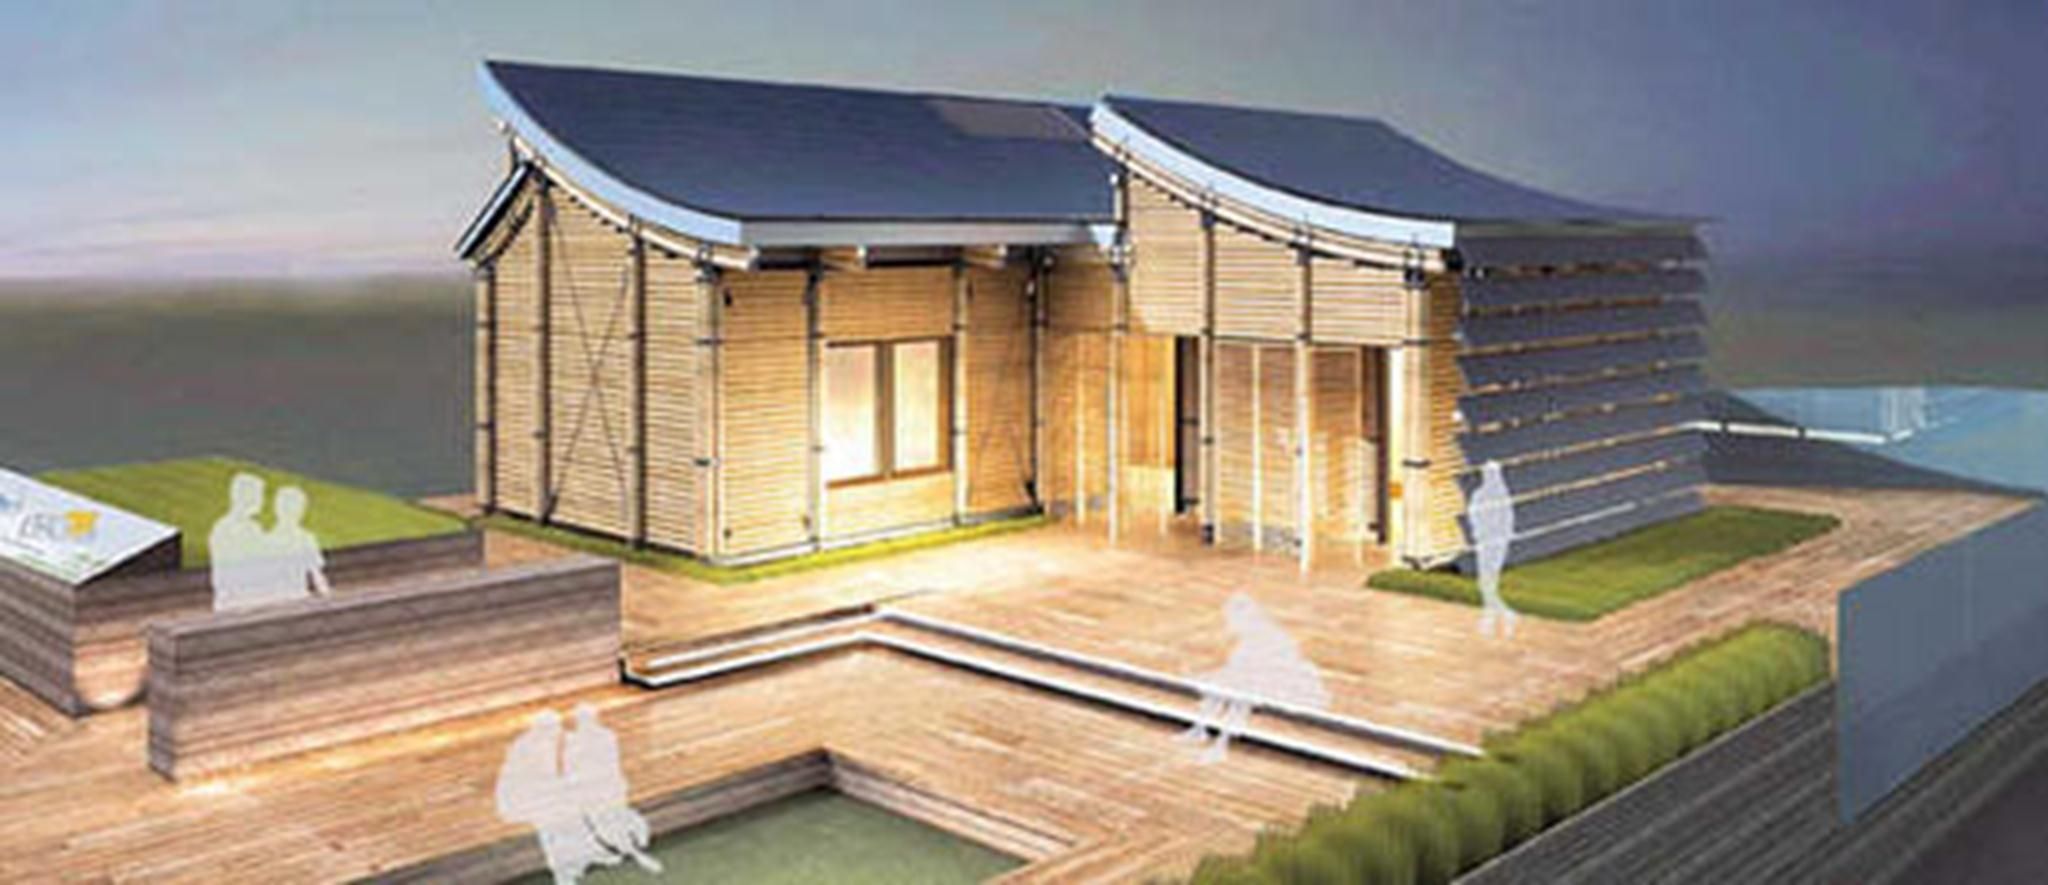 Bamboo-house-design-with-solar-panel (Copy)